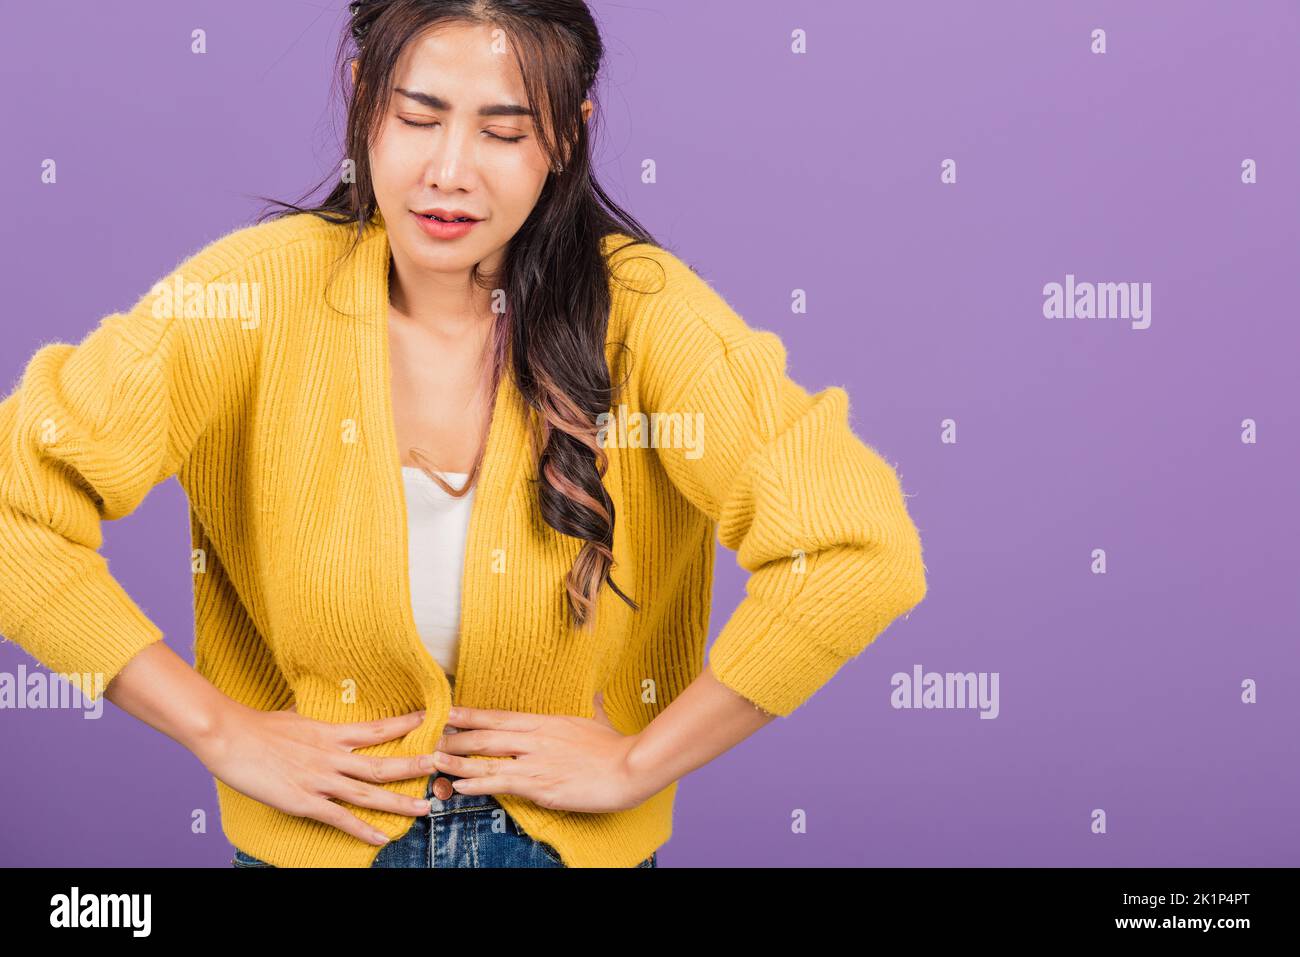 https://c8.alamy.com/comp/2K1P4PT/portrait-of-asian-beautiful-young-woman-has-stomachache-female-abdominal-pain-suffering-from-stomach-ache-studio-shot-isolated-on-purple-background-2K1P4PT.jpg